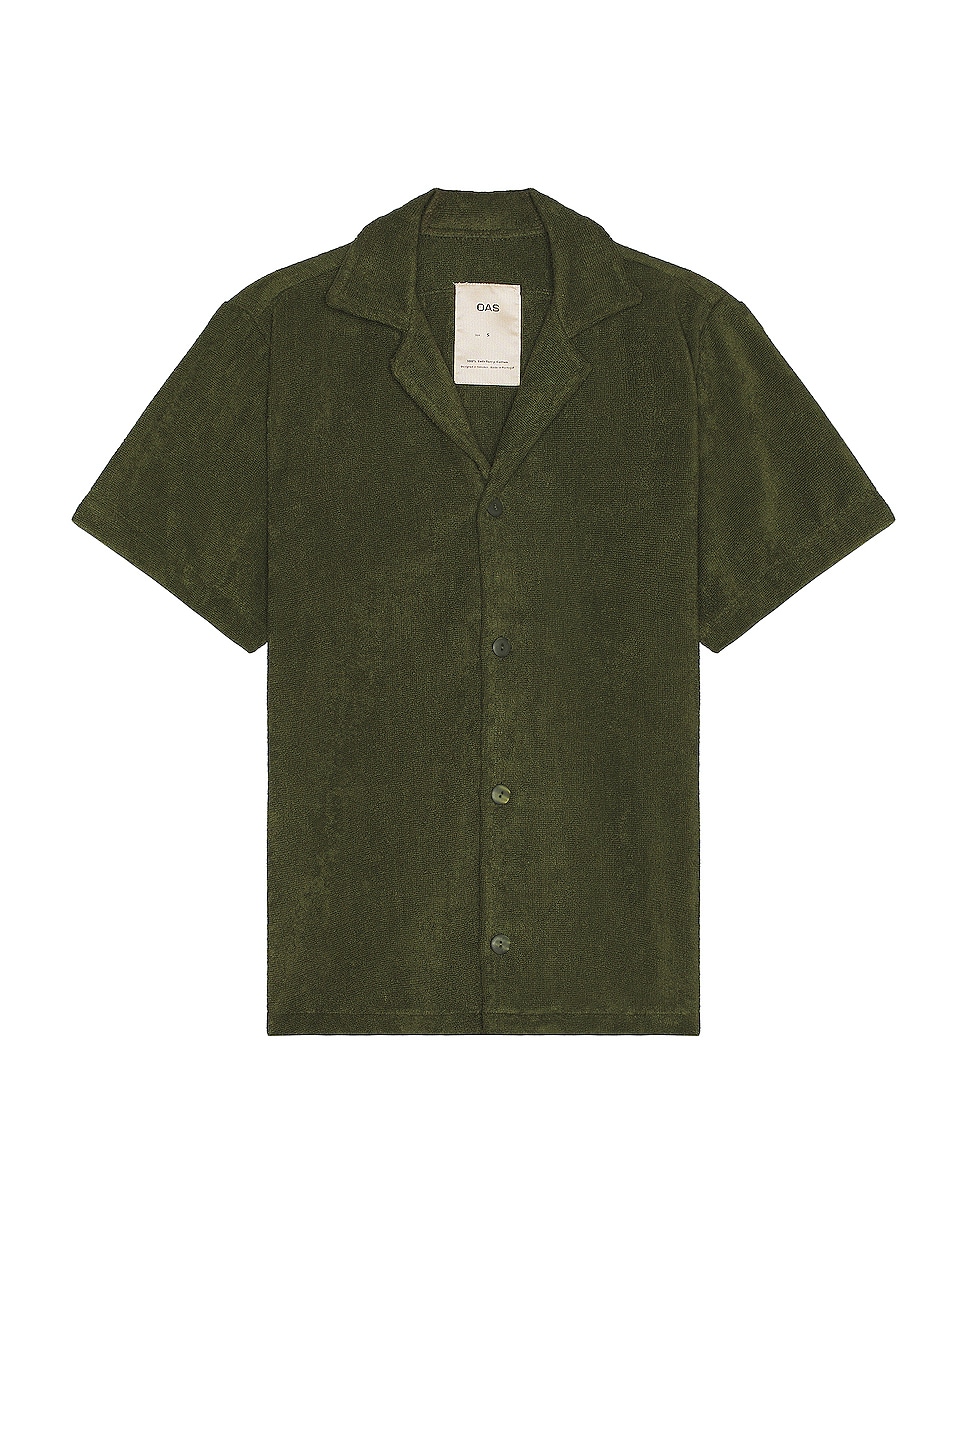 Image 1 of OAS Cuba Terry Shirt in Green